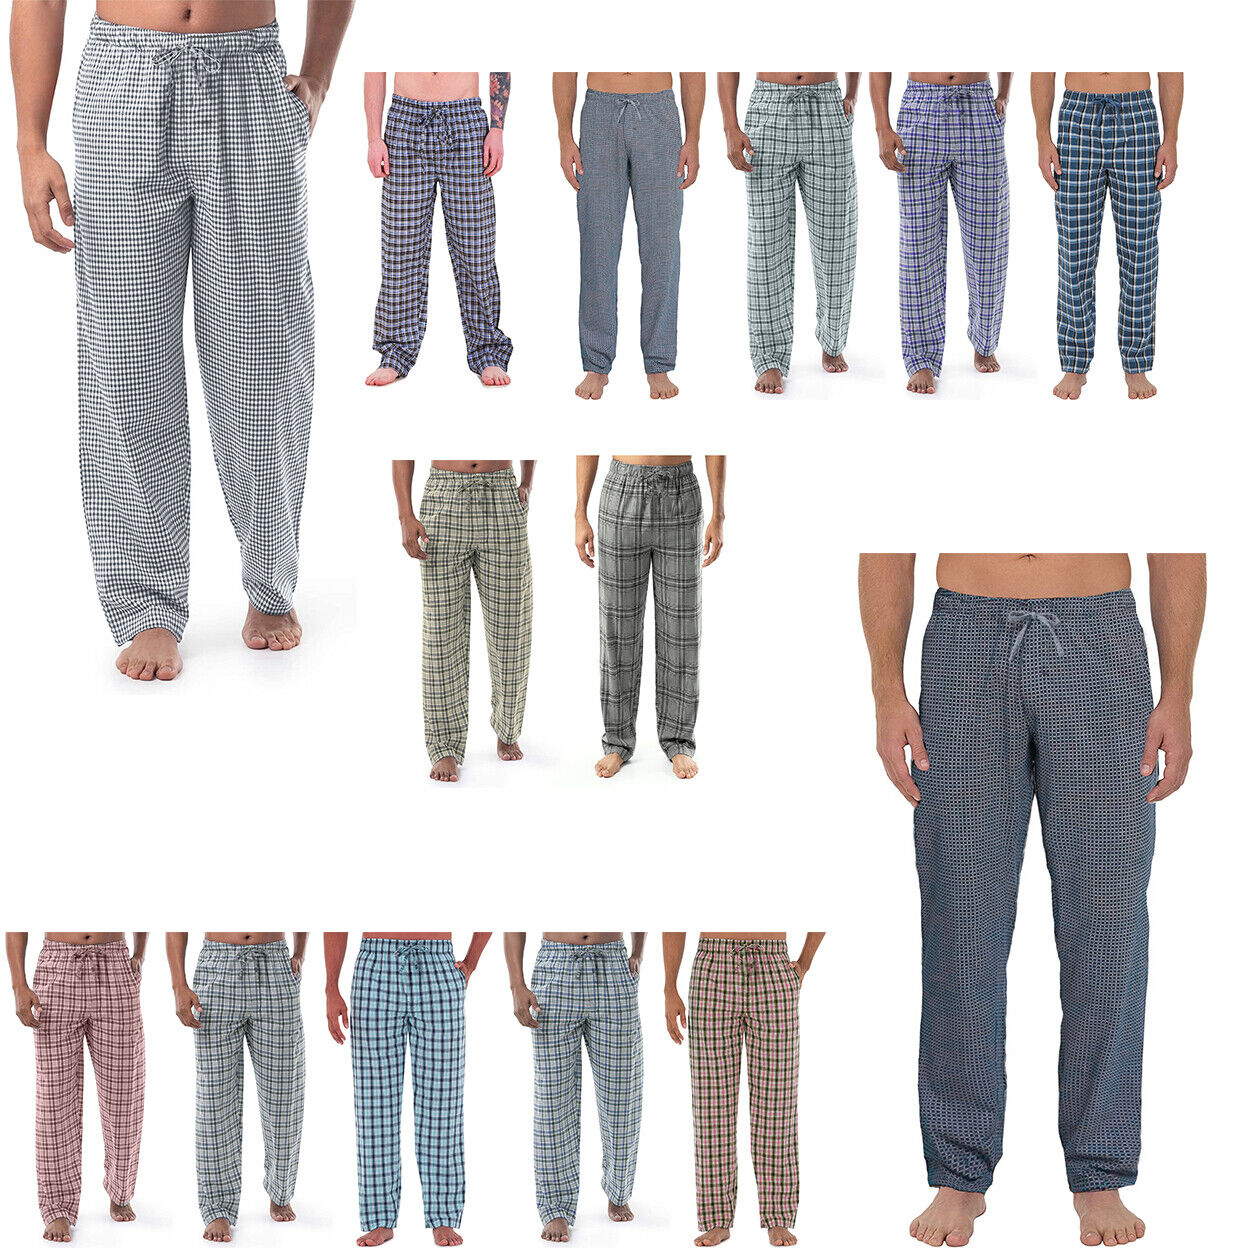 Men's Ultra-Soft Solid & Plaid Cotton Jersey Knit Comfy Sleep Lounge Pajama Pants - Solid, Large